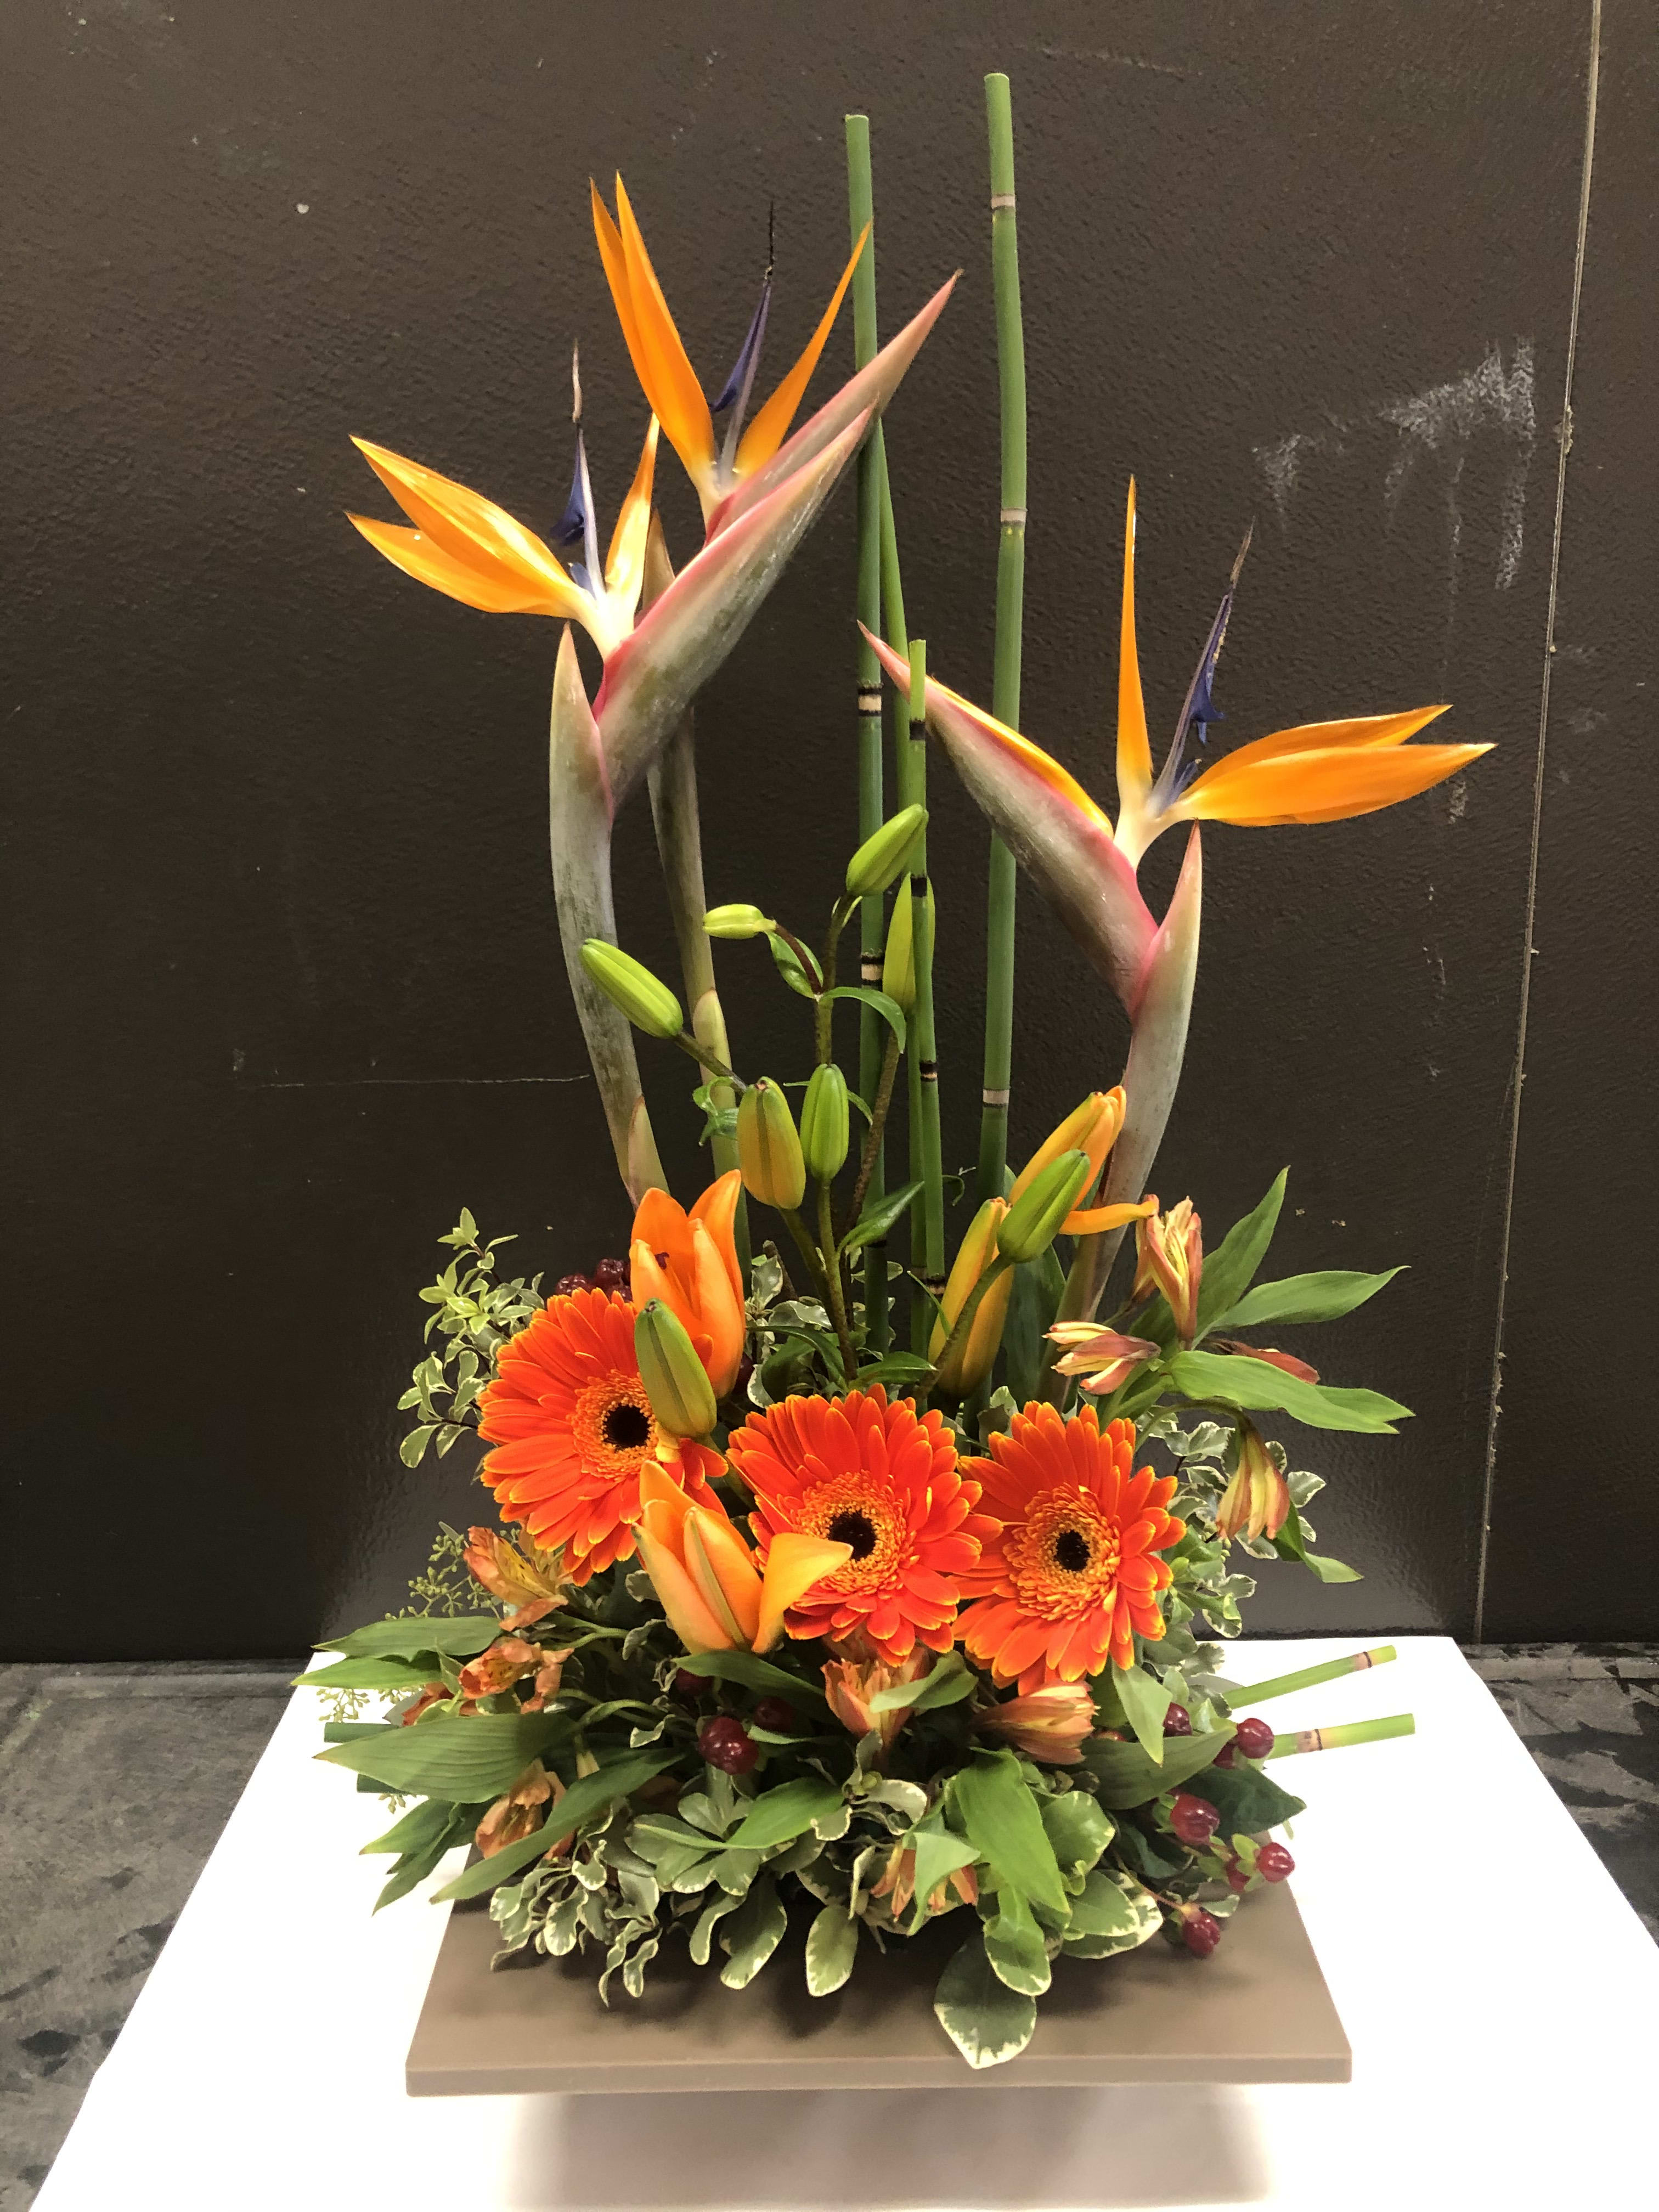 Dancing in paradise - This arrangement is set elegantly with birds of paradise and gerbera in a contemporary tray. This will remind you of a time in paradise with these tropical flowers.